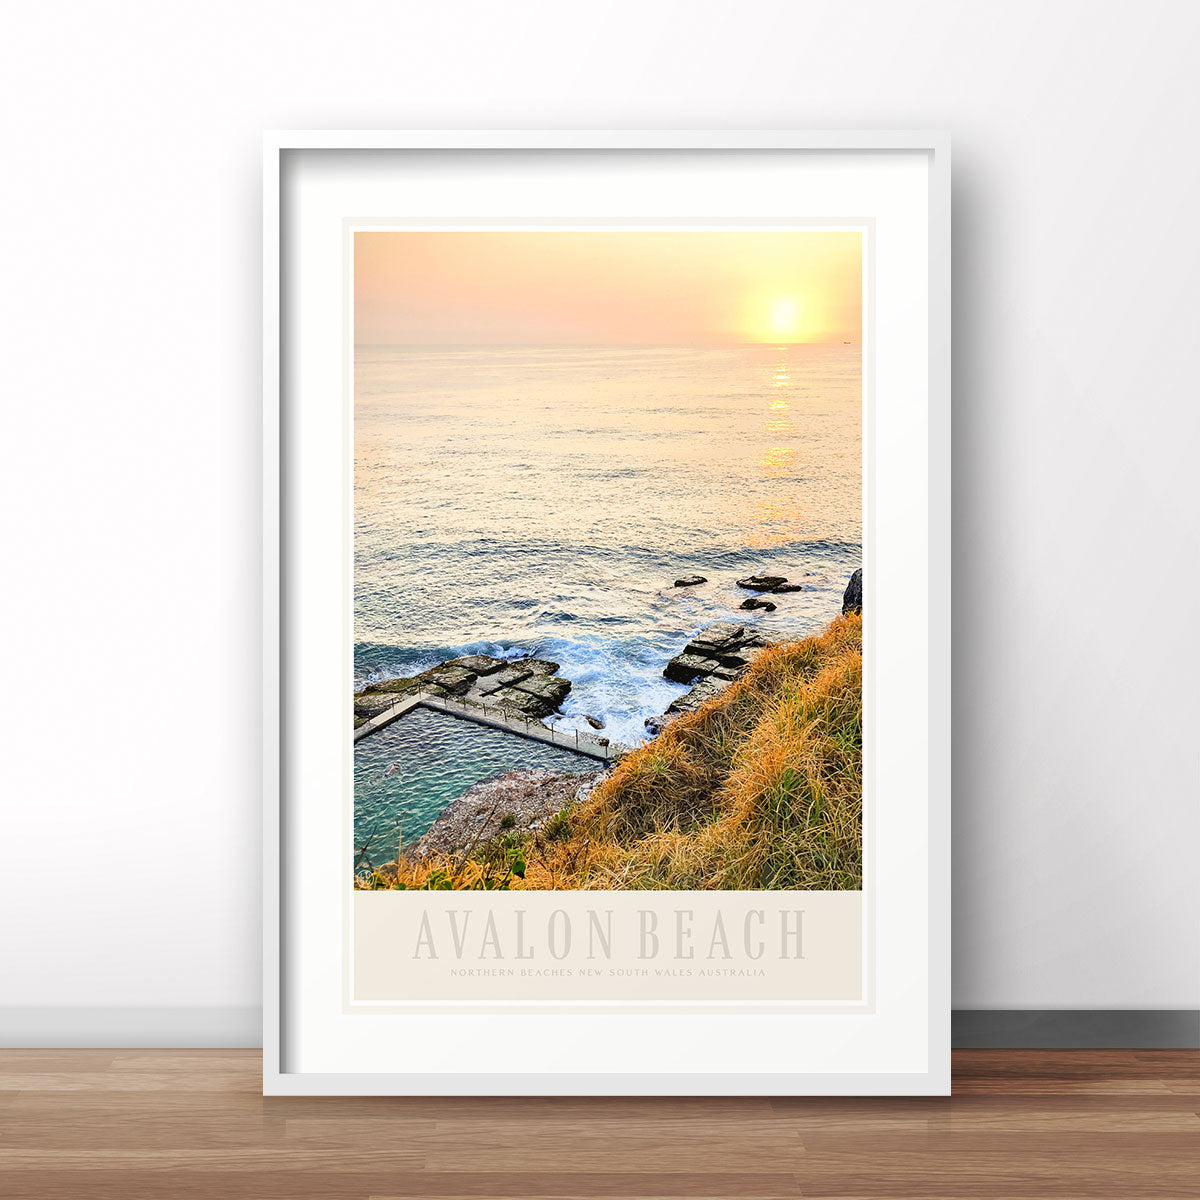 Avalon Beach vintage retro travel poster print by Places We Luv